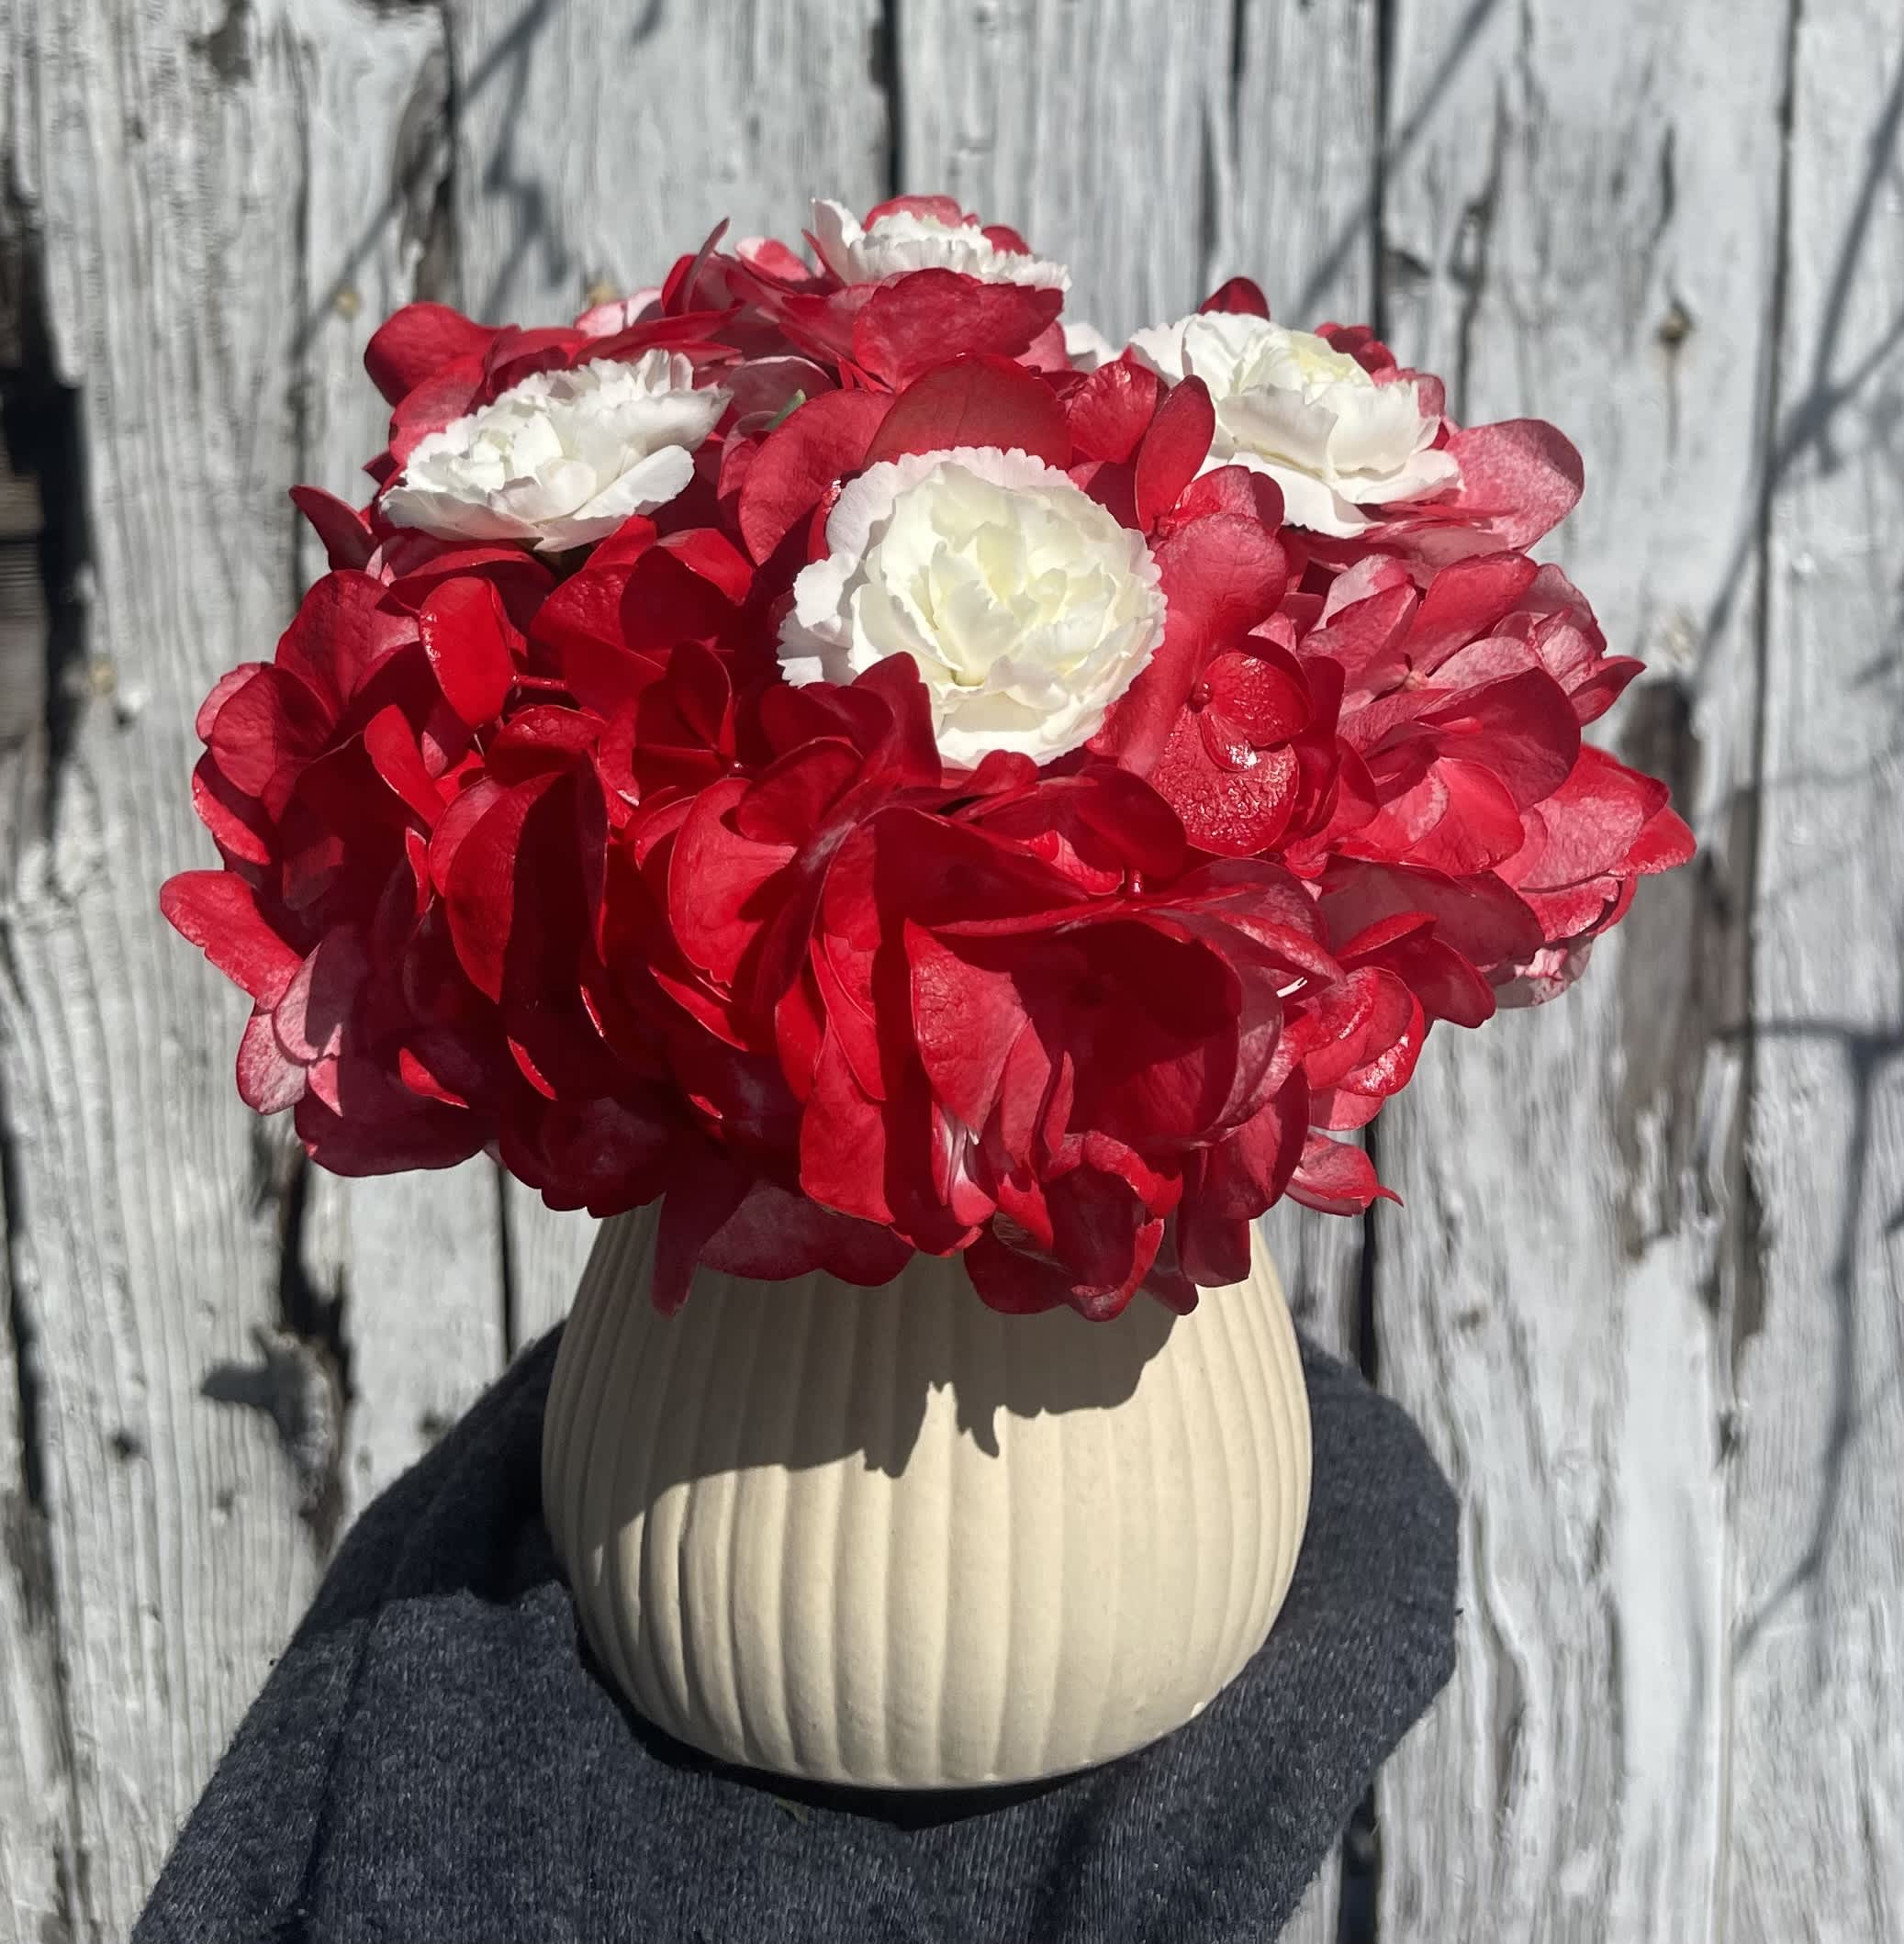 Mushroom Bouquet  - Just a sweet and cute little mushroom bouquet in a ceramic mushroom container. 